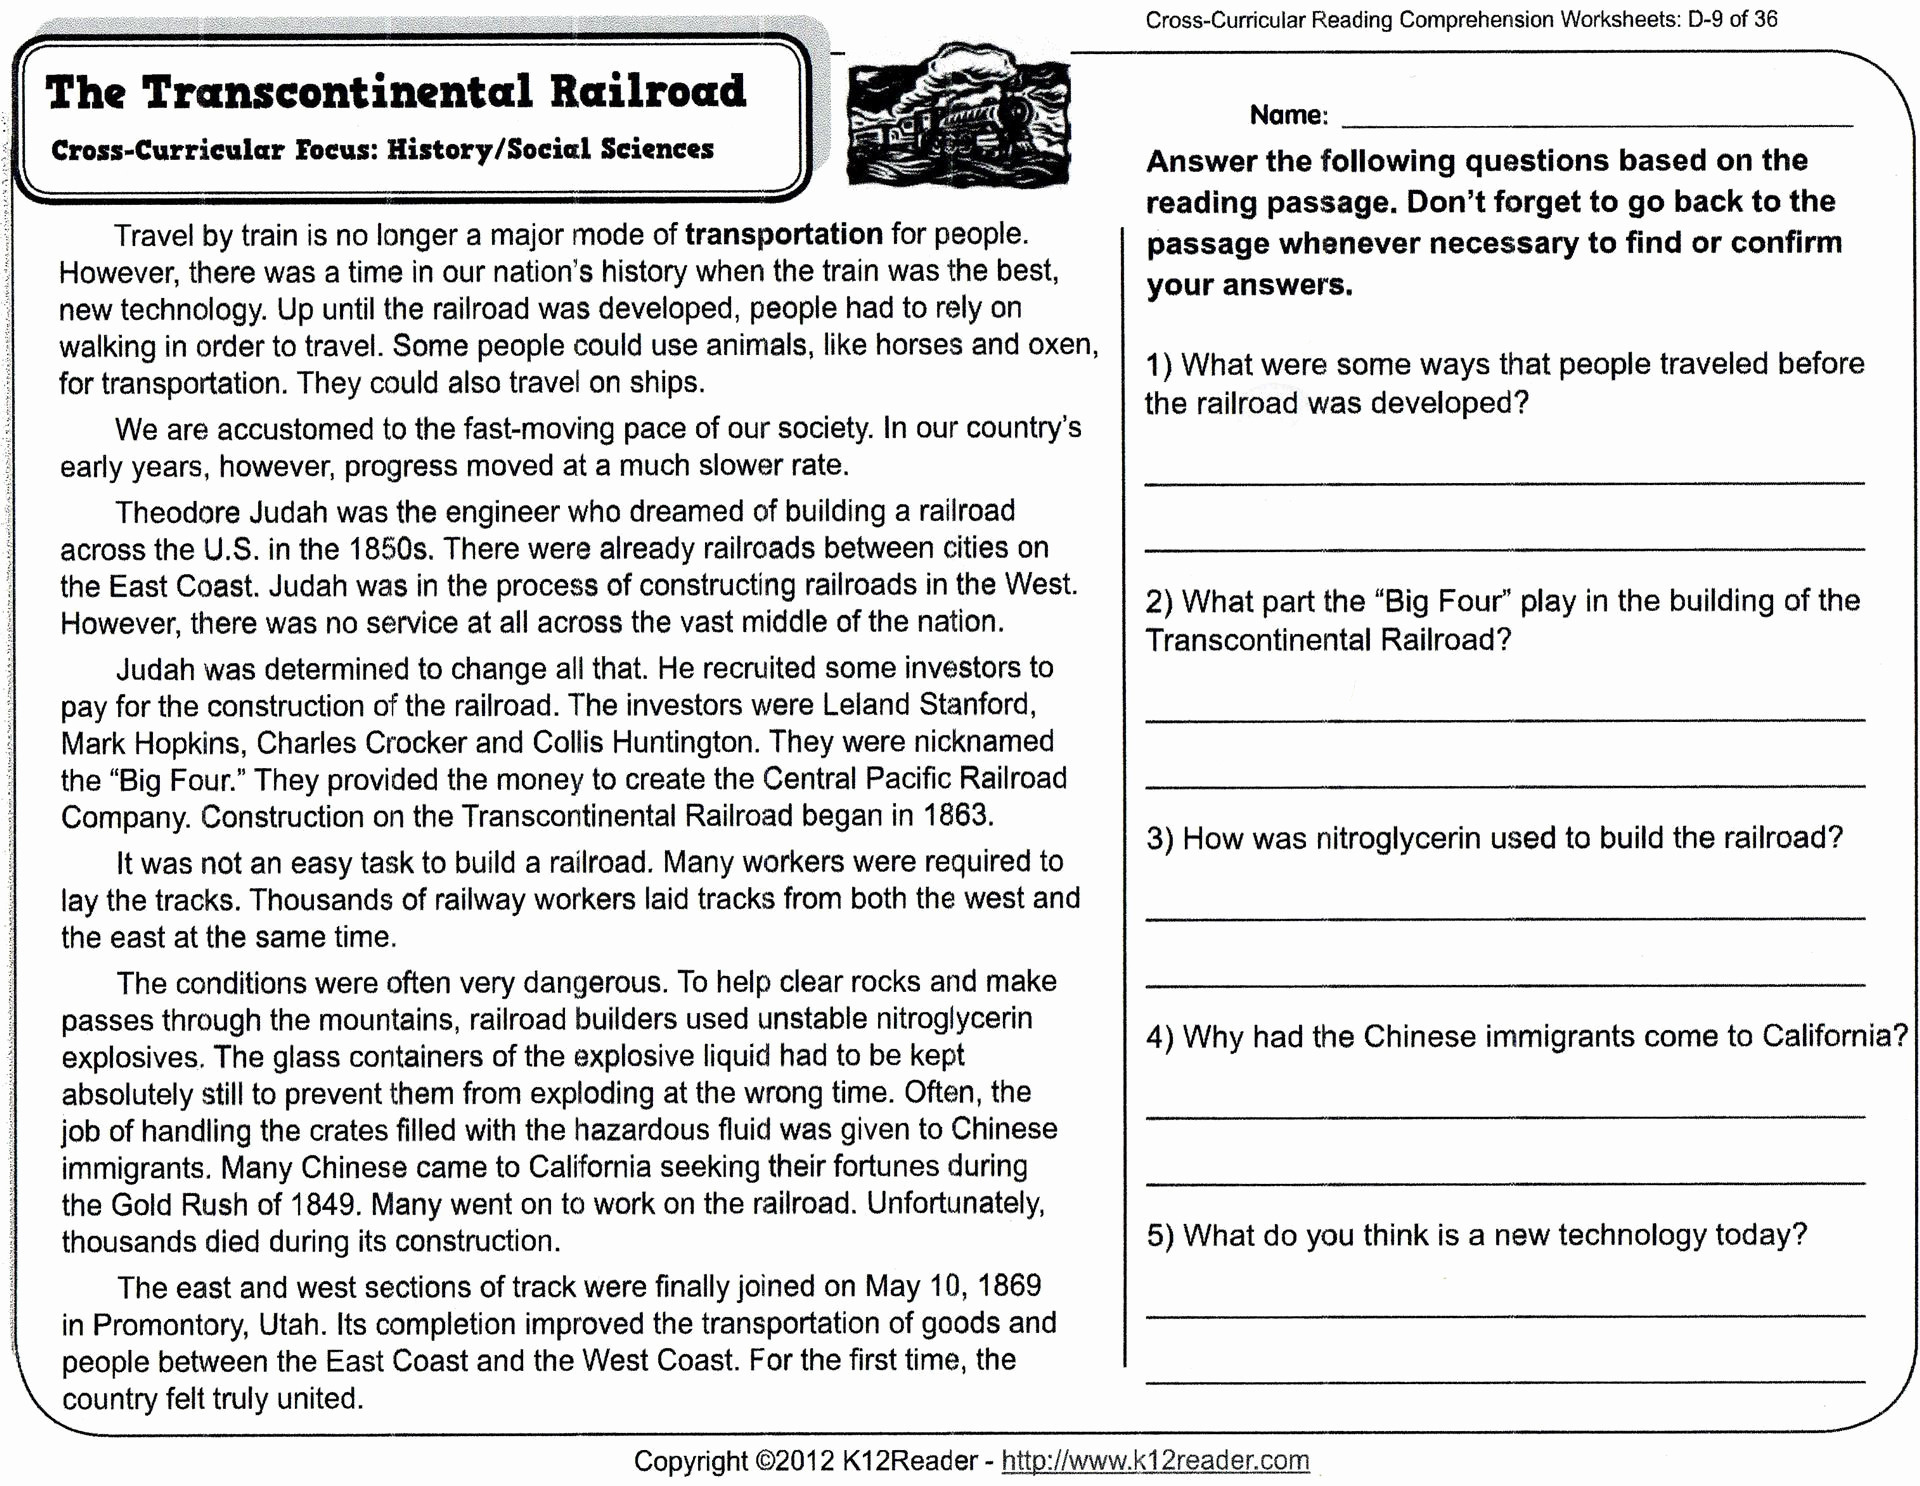 Reading Comprehension Worksheets For 8Th Grade Free Report Db excel